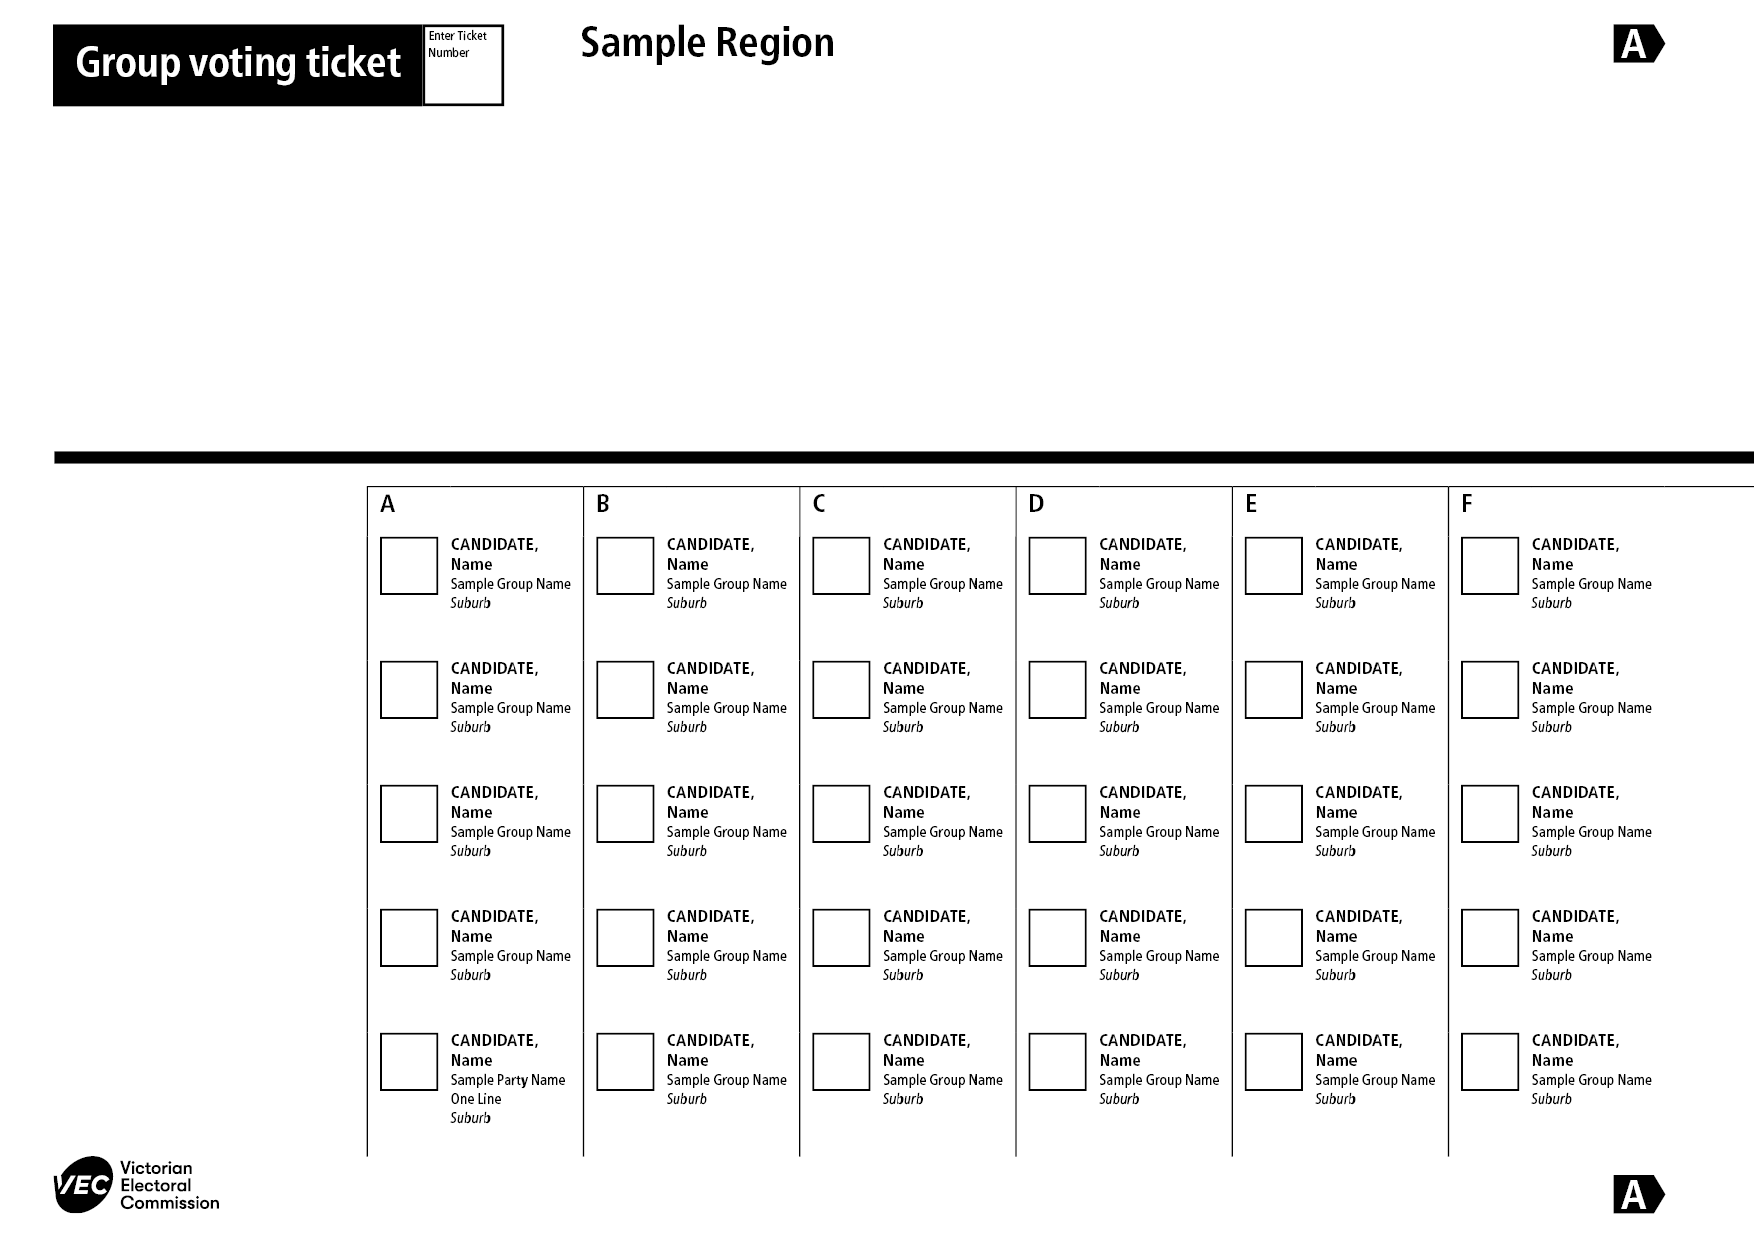 Example of a group voting ticket showing blank squares where candidates will write the preferences they want to assign